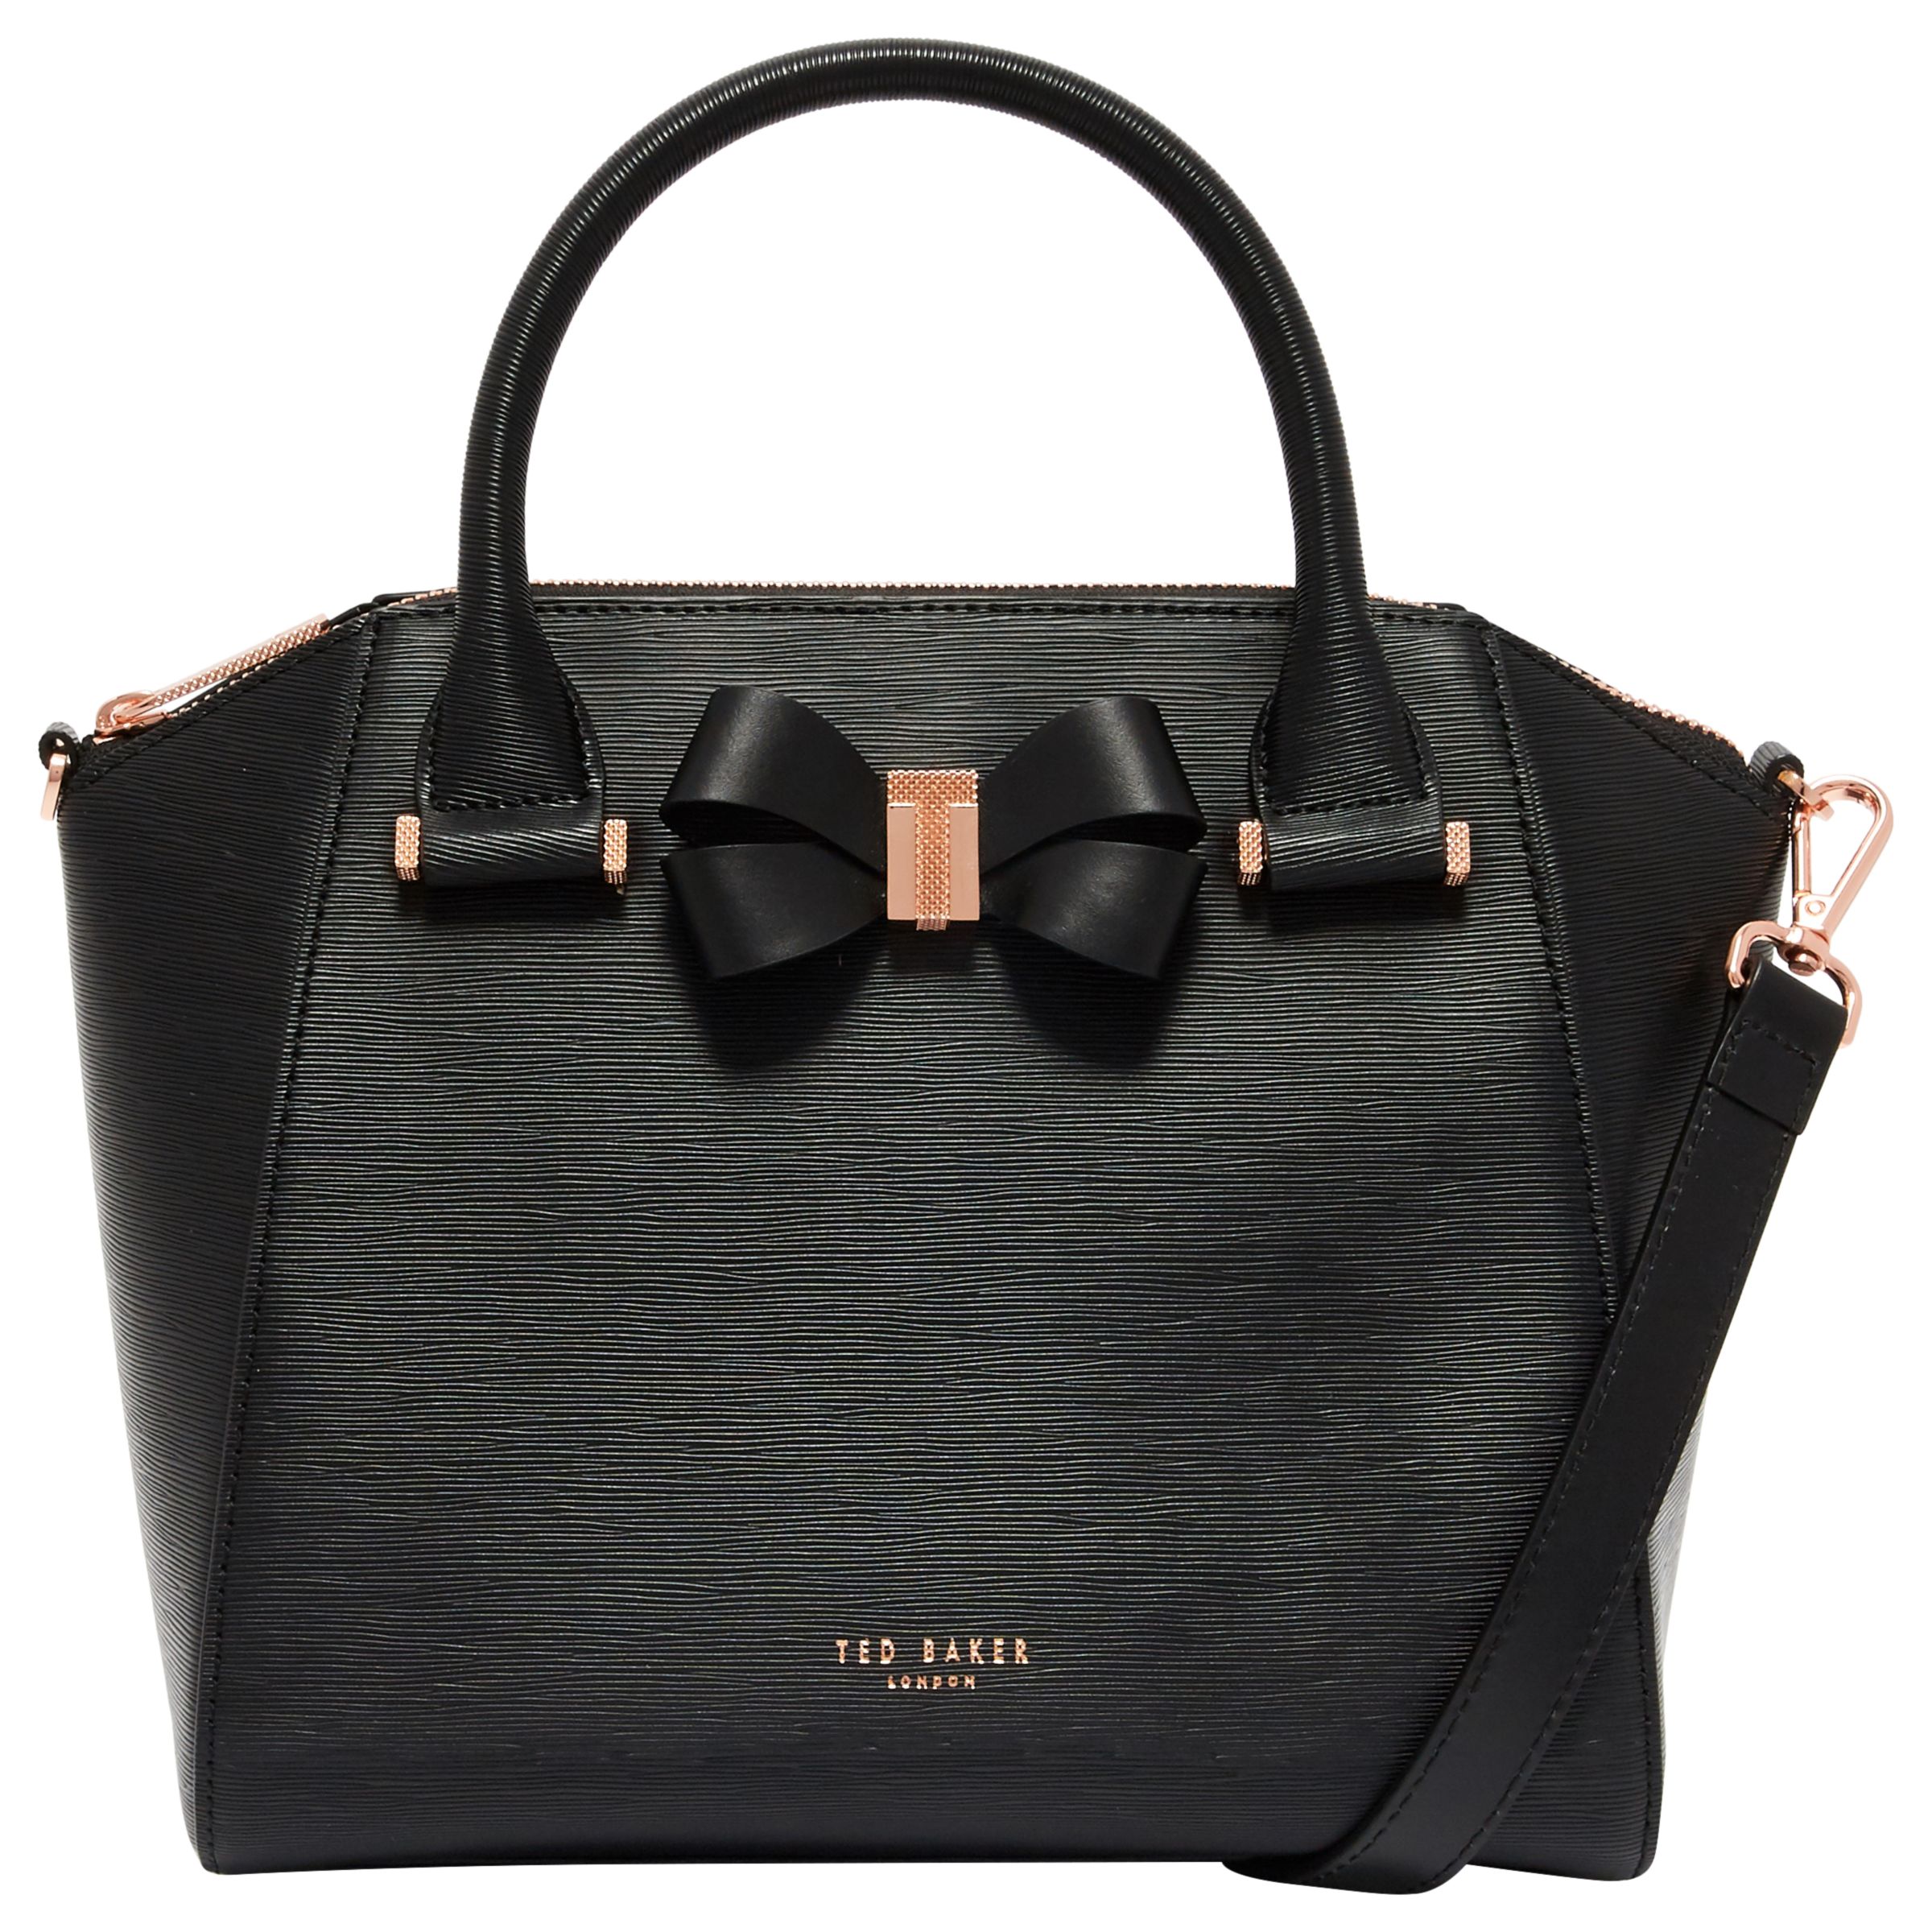 Astonishment drive Underline Ted Baker Bow Detail Leather Small Tote Bag, Black